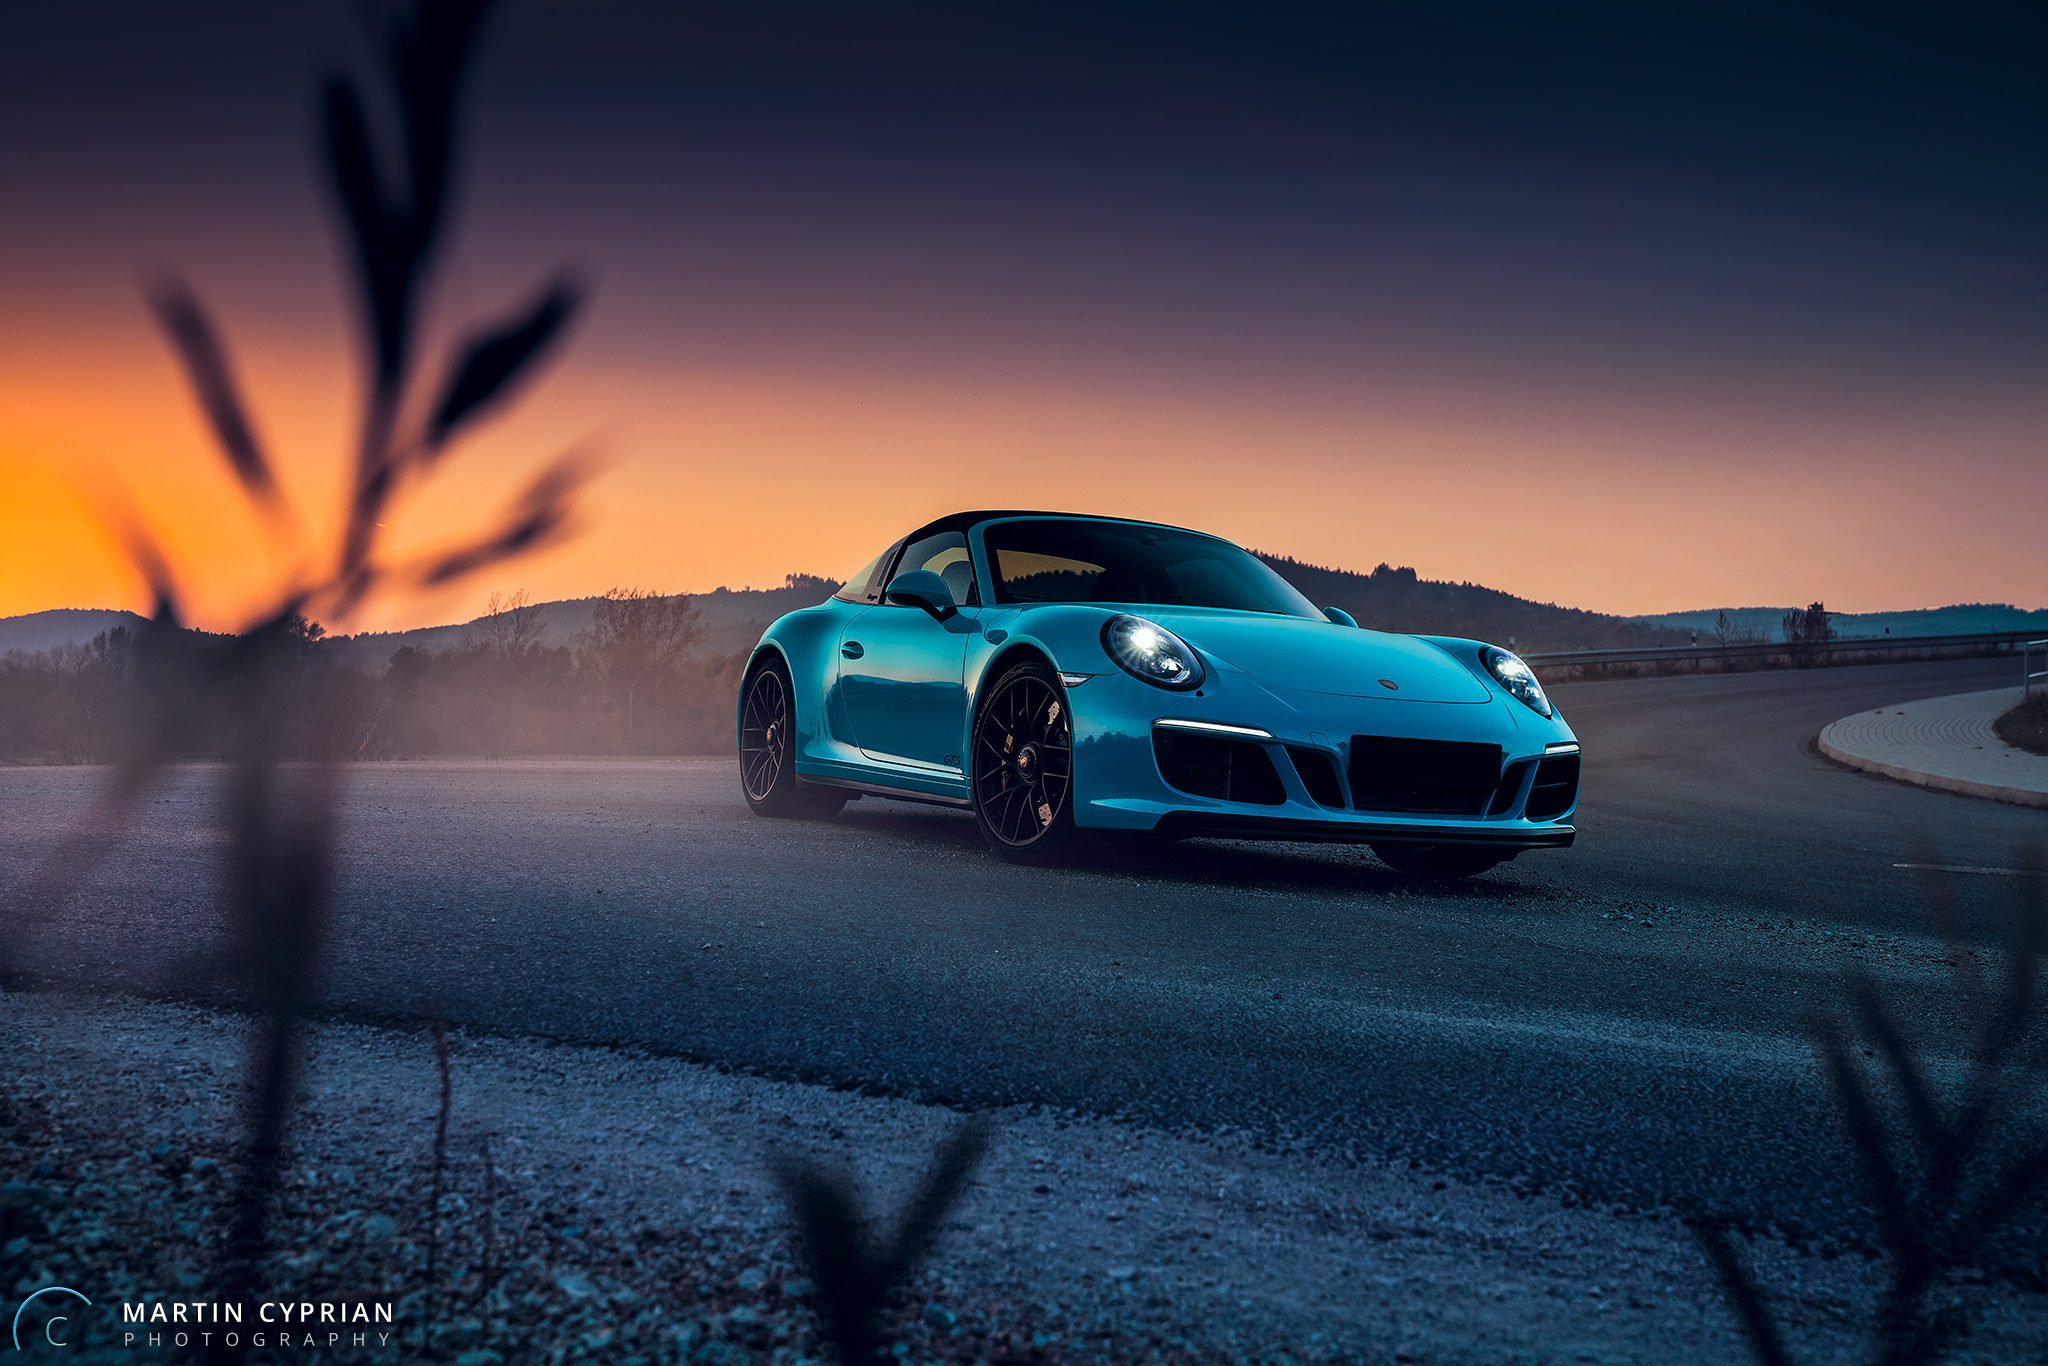 A blue Porsche 911 drives down a country road in the evening